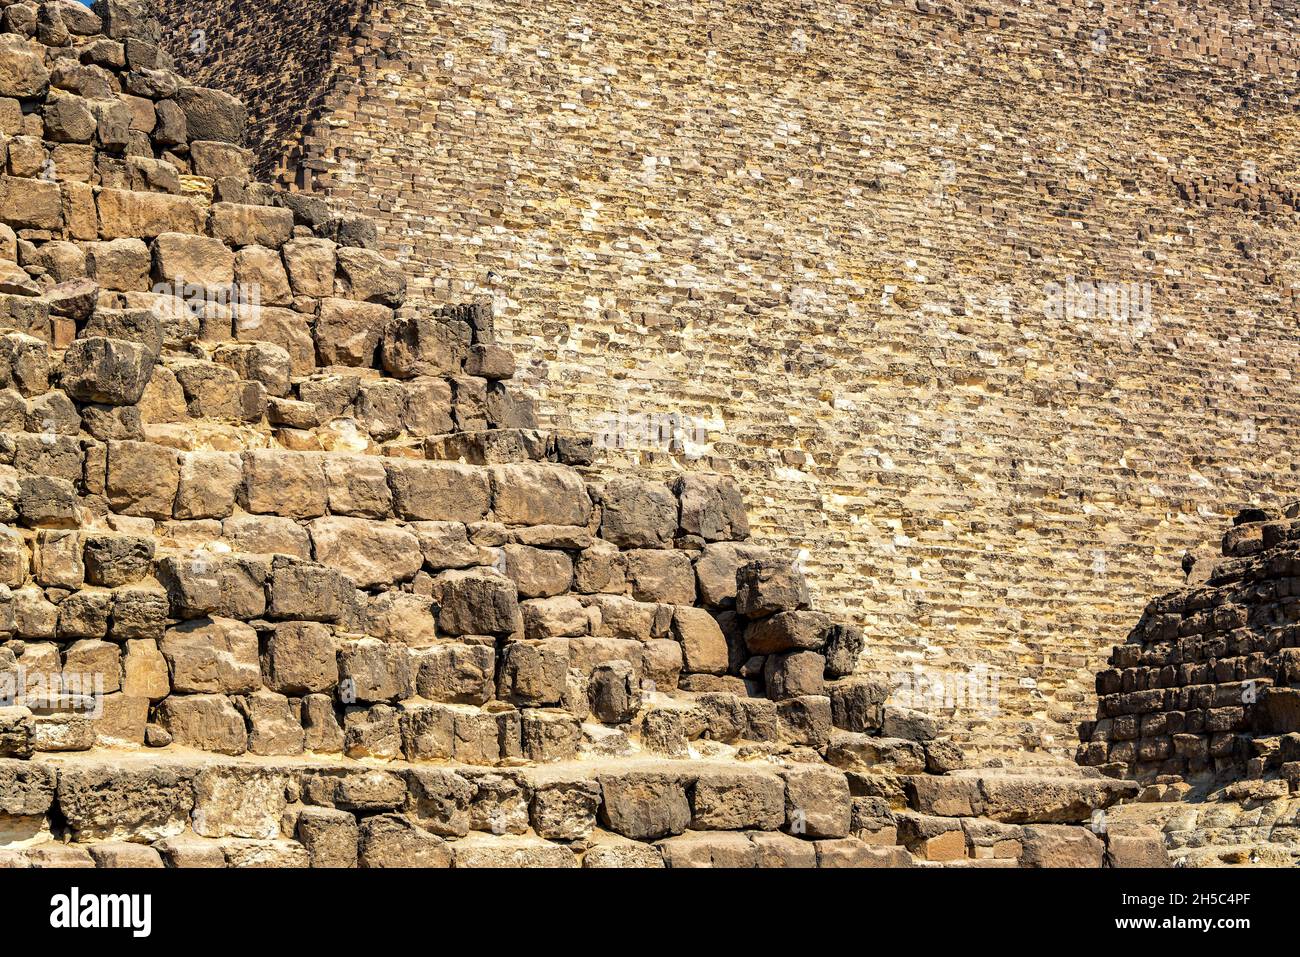 Closeup view of the Great Pyramid of Giza in Egypt Stock Photo